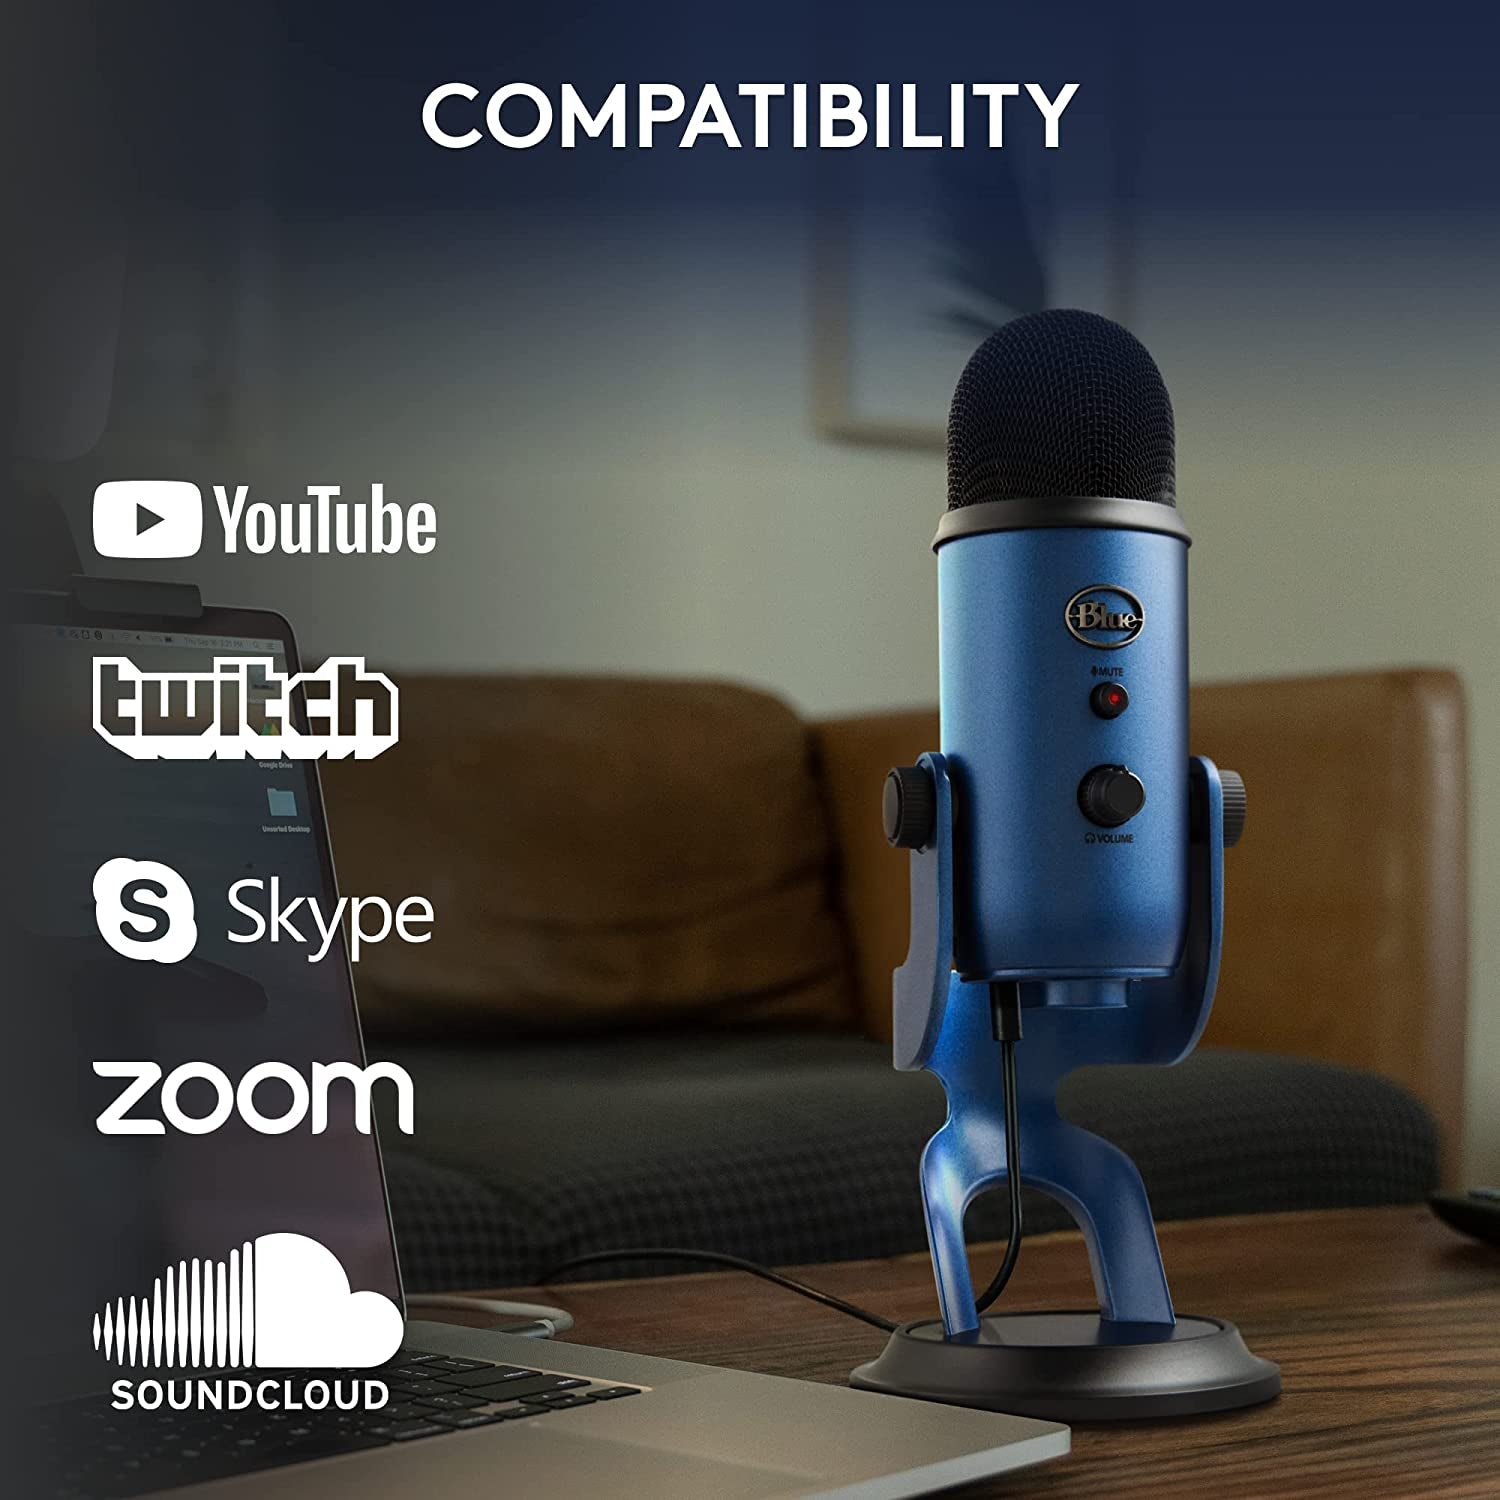 Logitech for Creators  Yeti USB Microphone for Gaming, Streaming, Podcasting, Twitch, Youtube, Discord, Recording for PC and Mac, 4 Polar Patterns, Studio Quality Sound, Plug & Play-Midnight